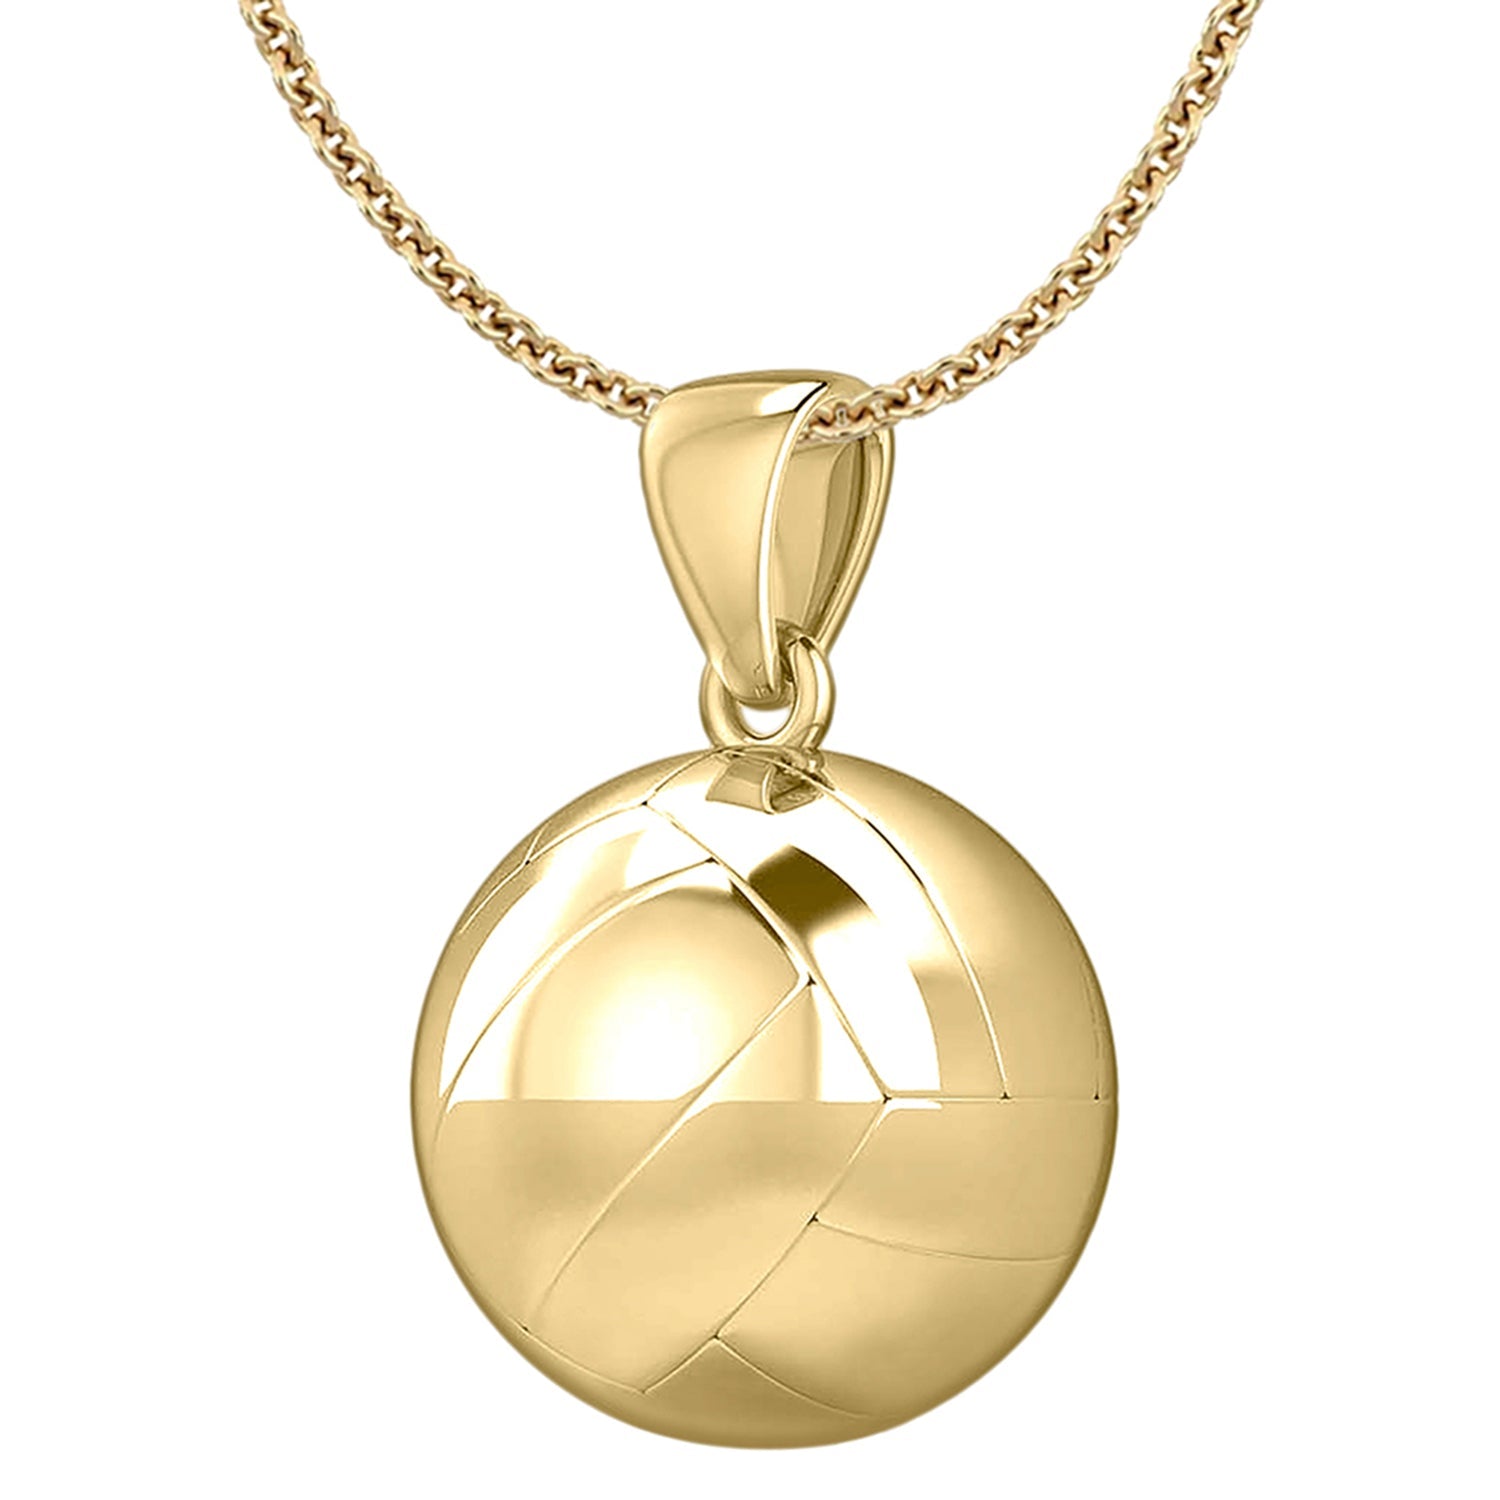 Volley Ball Necklace - Gold Necklace In 3D Design